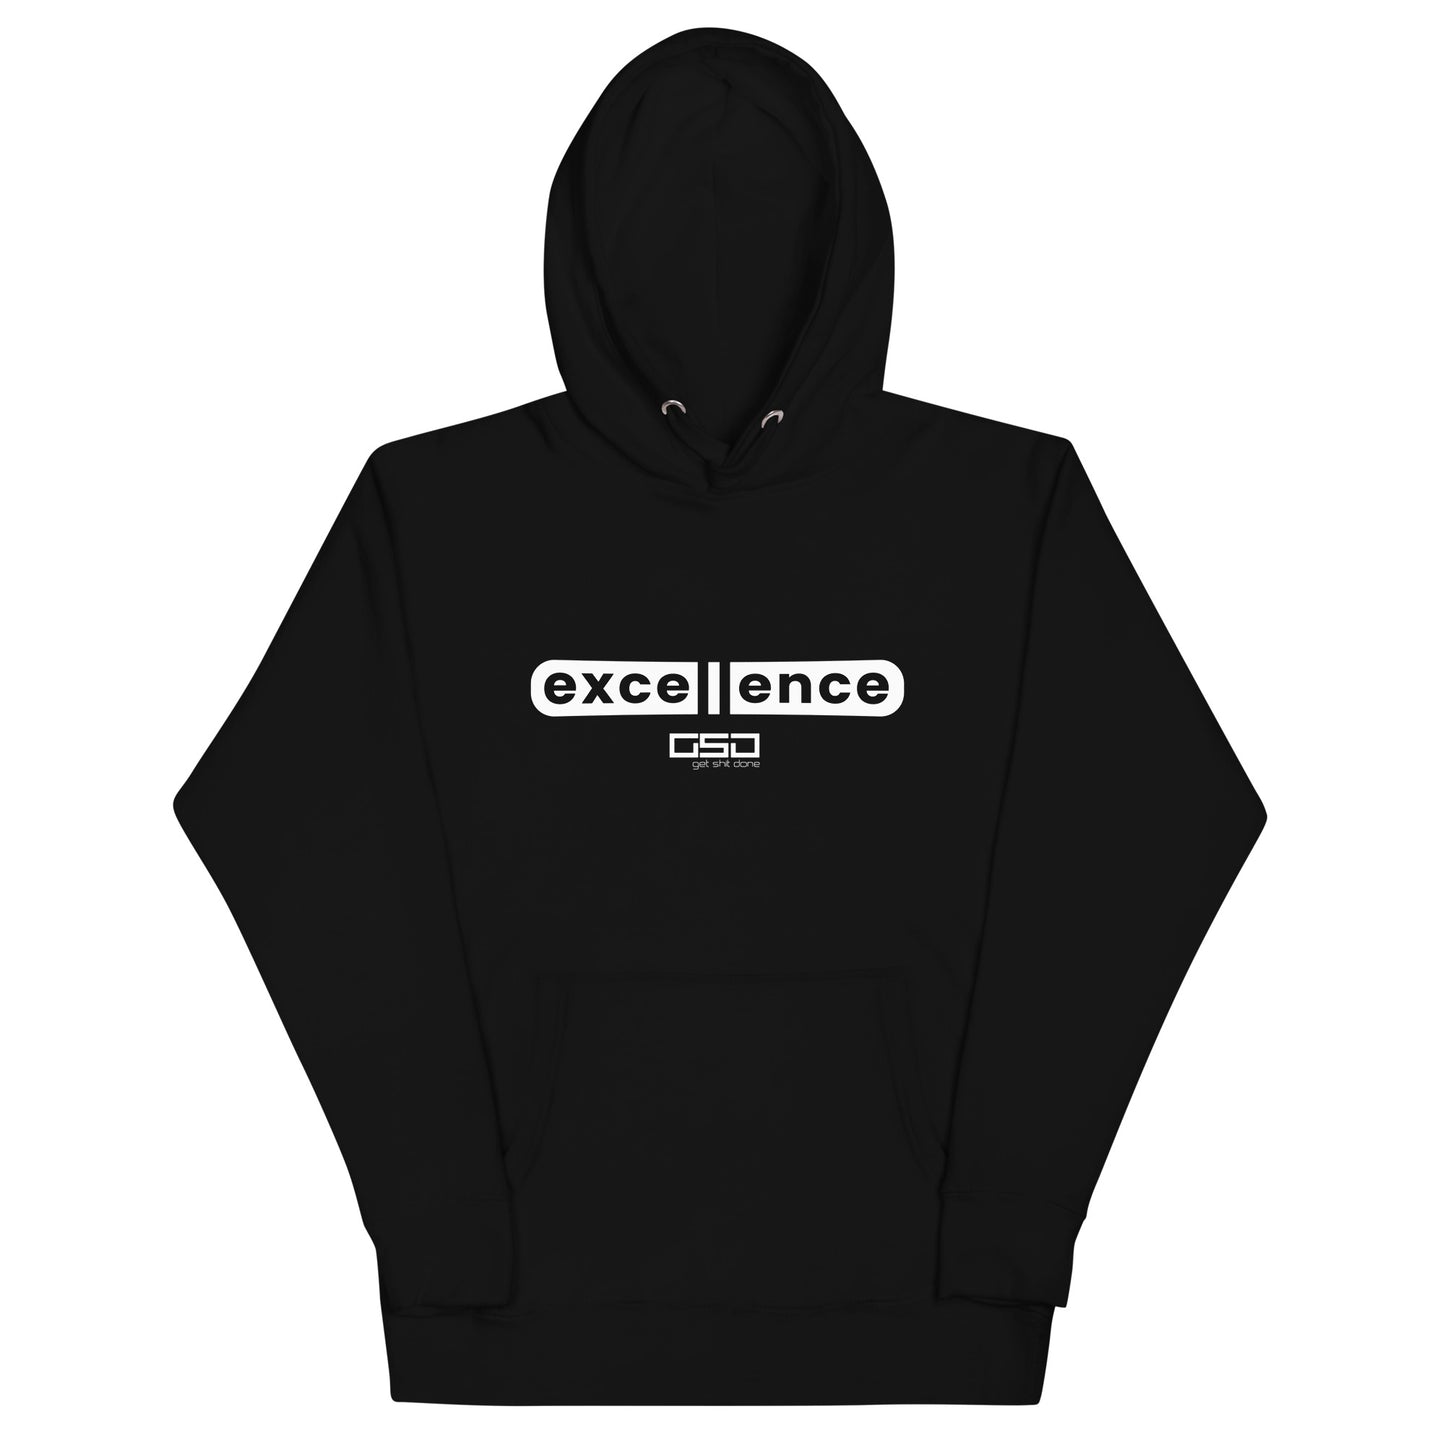 Excellence-Unisex Hoodie